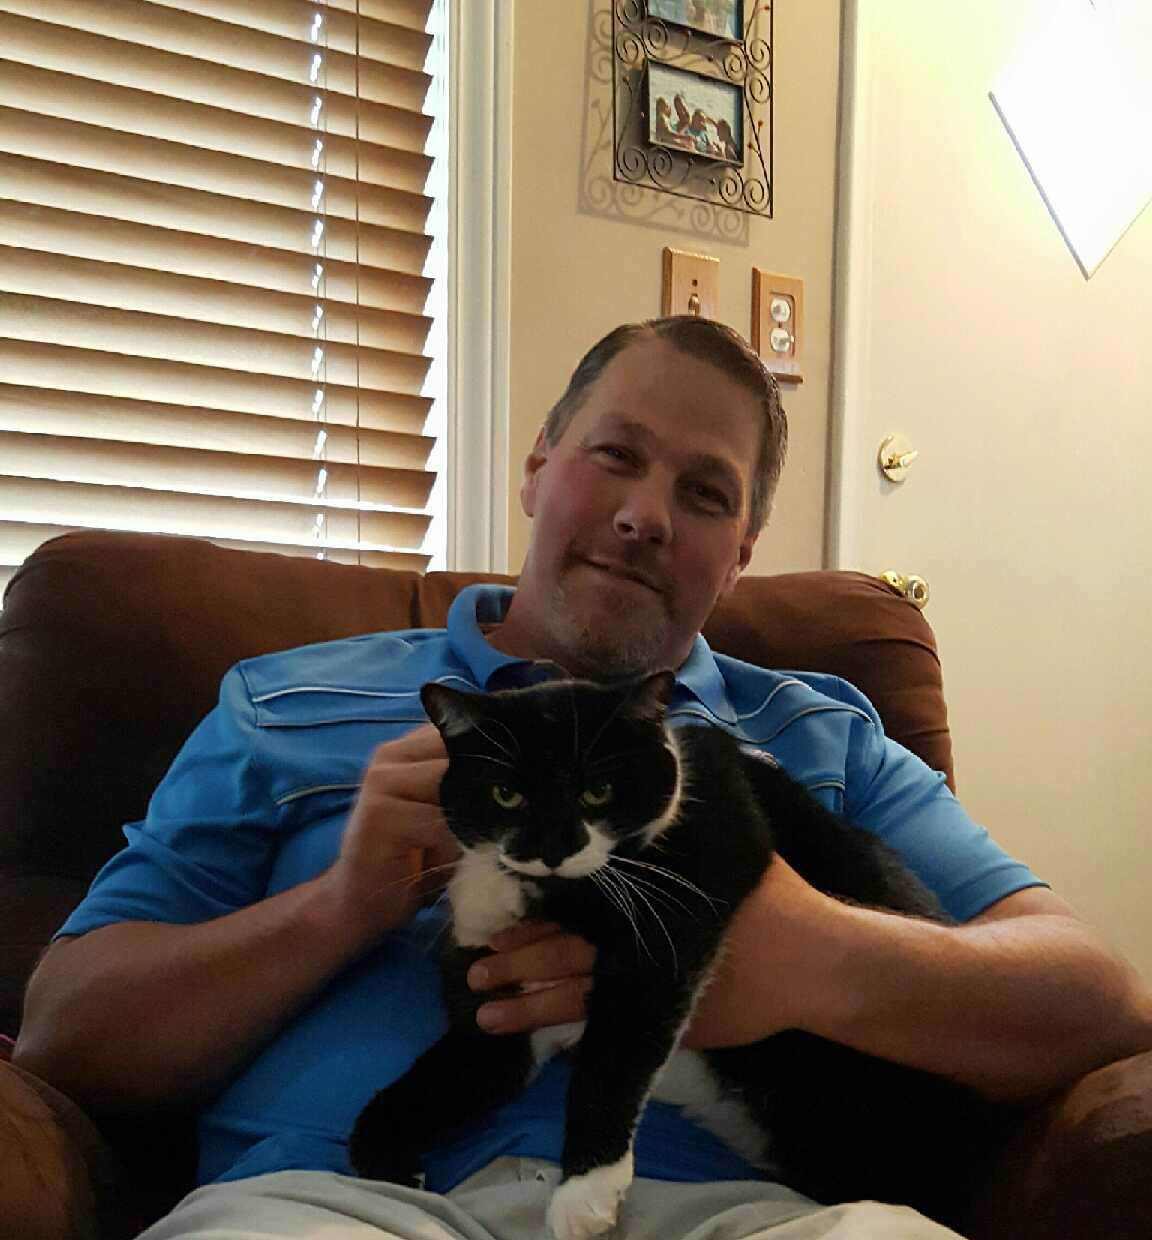 Image: My dad with my cat